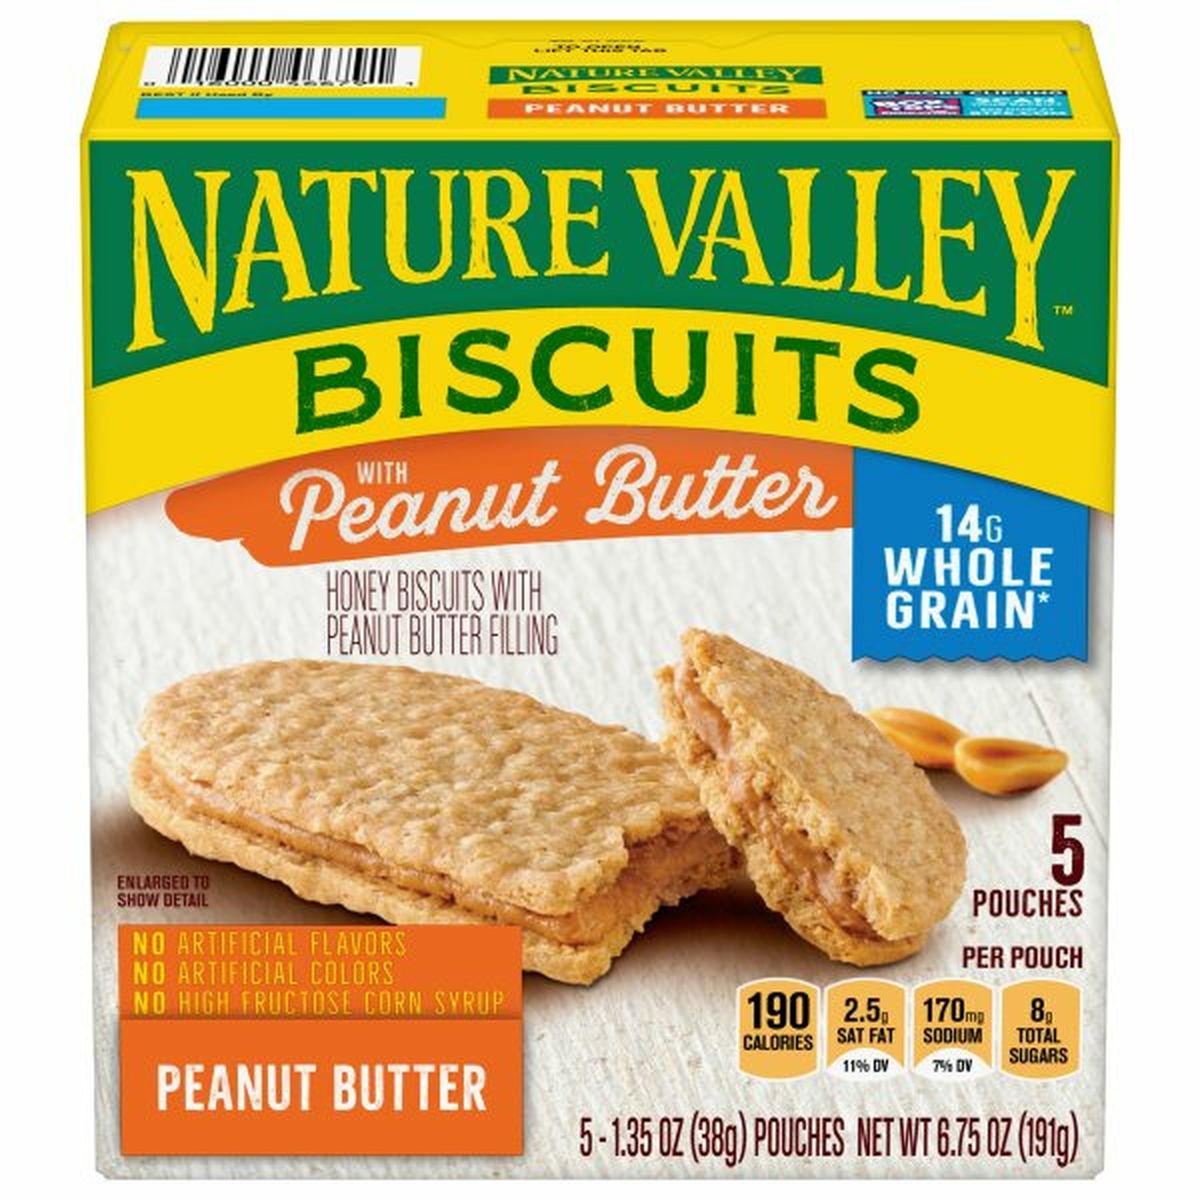 Calories in Nature Valley Biscuits, Peanut Butter